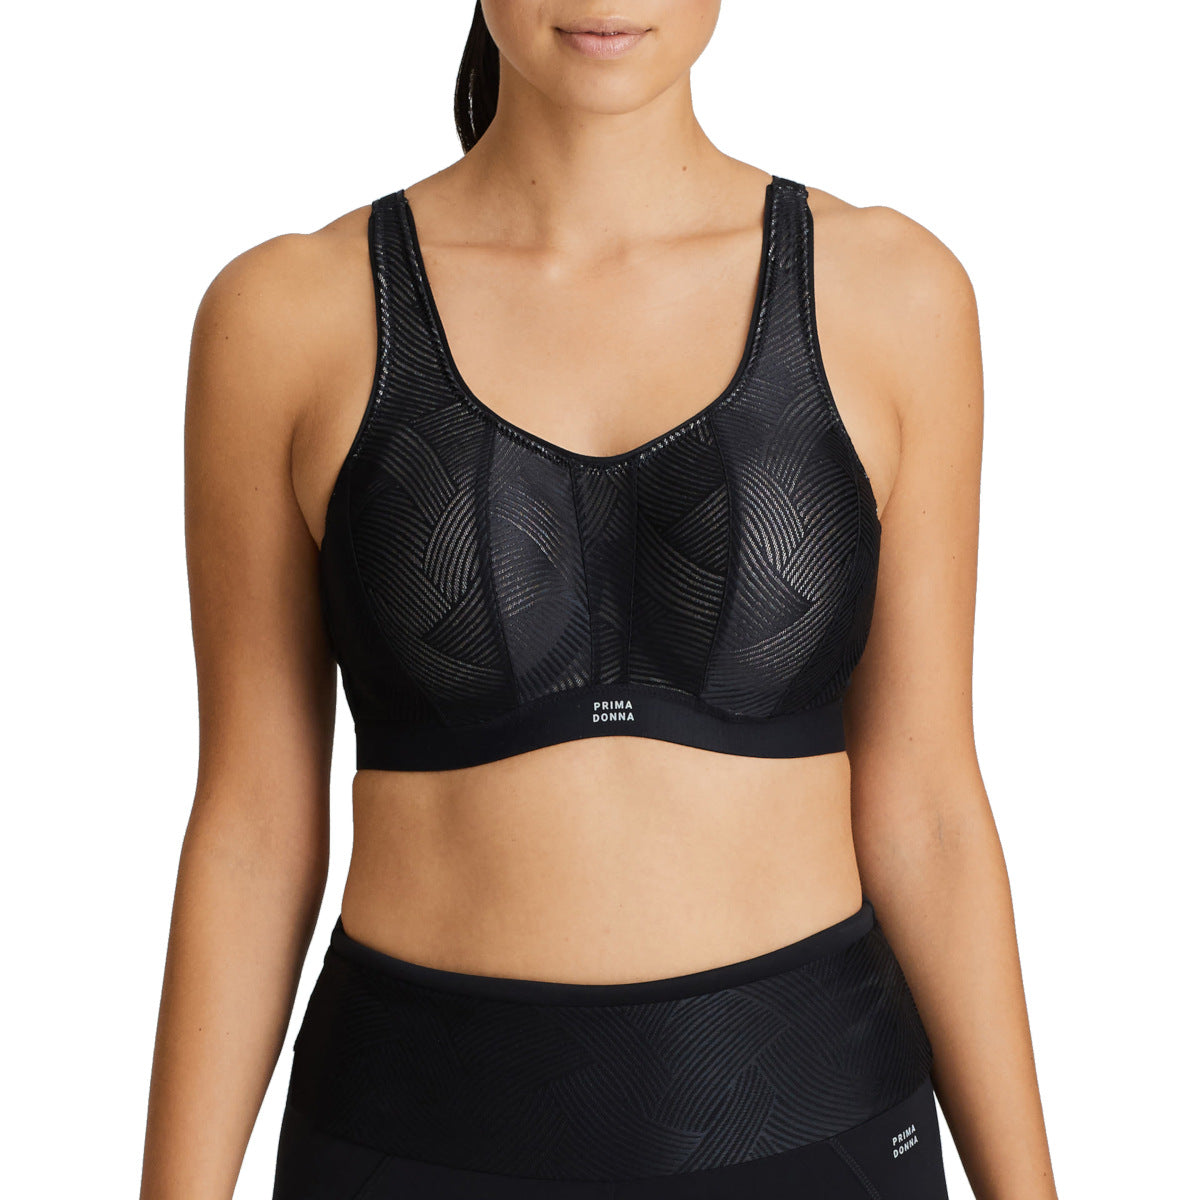 Prima Donna The Game Padded Wired Sports Bra - Midnight Magic Lingerie